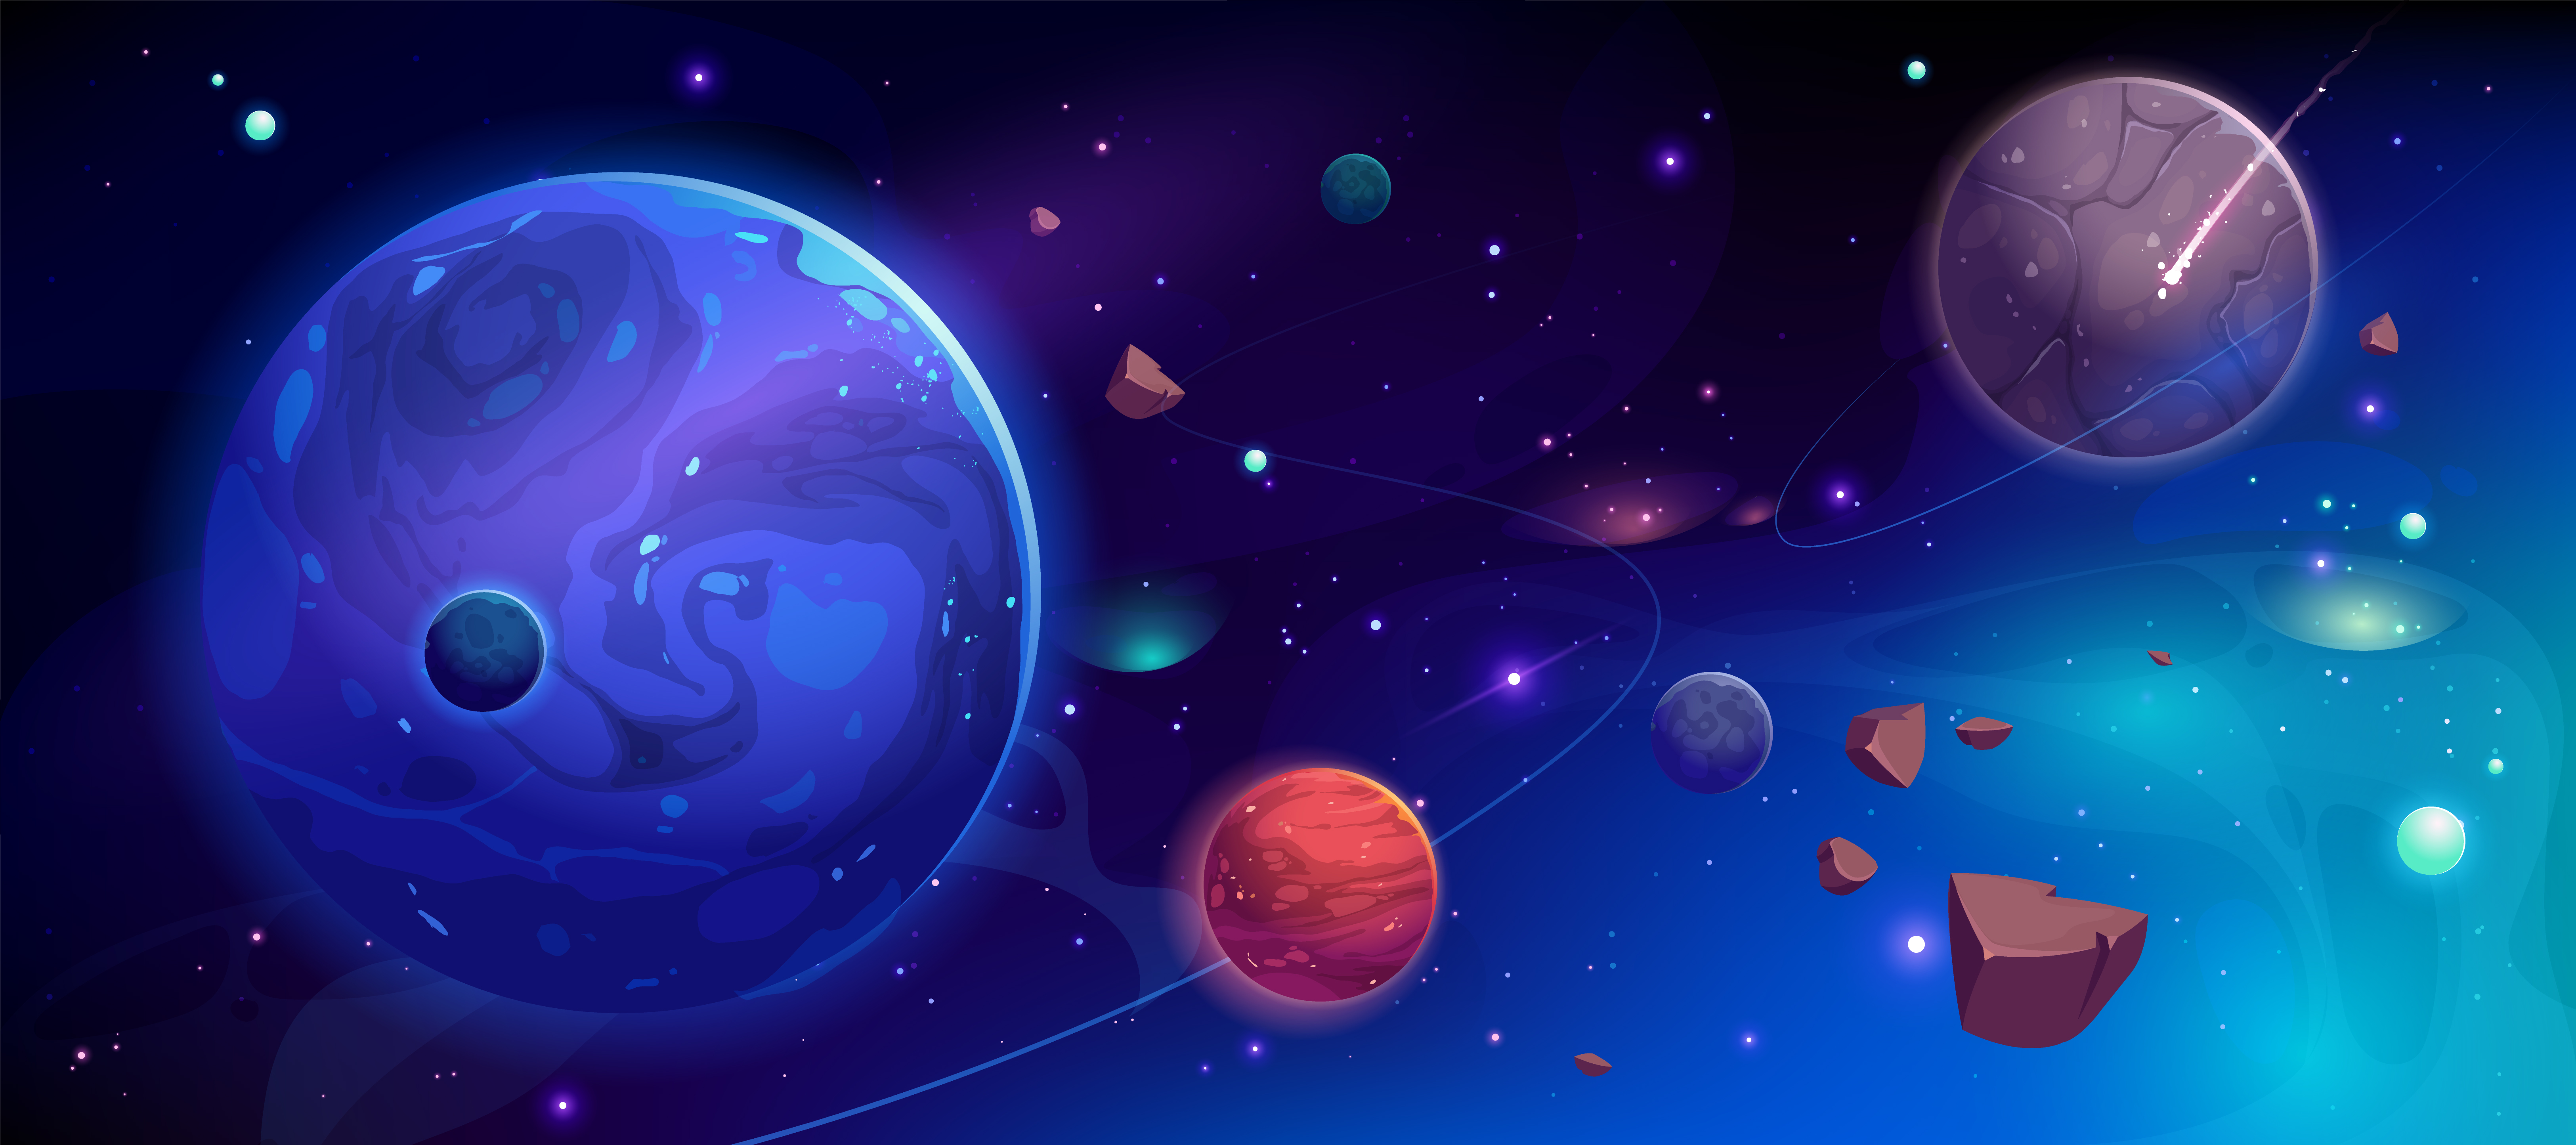 Visual illustration of planets in outer space with satellites and meteors